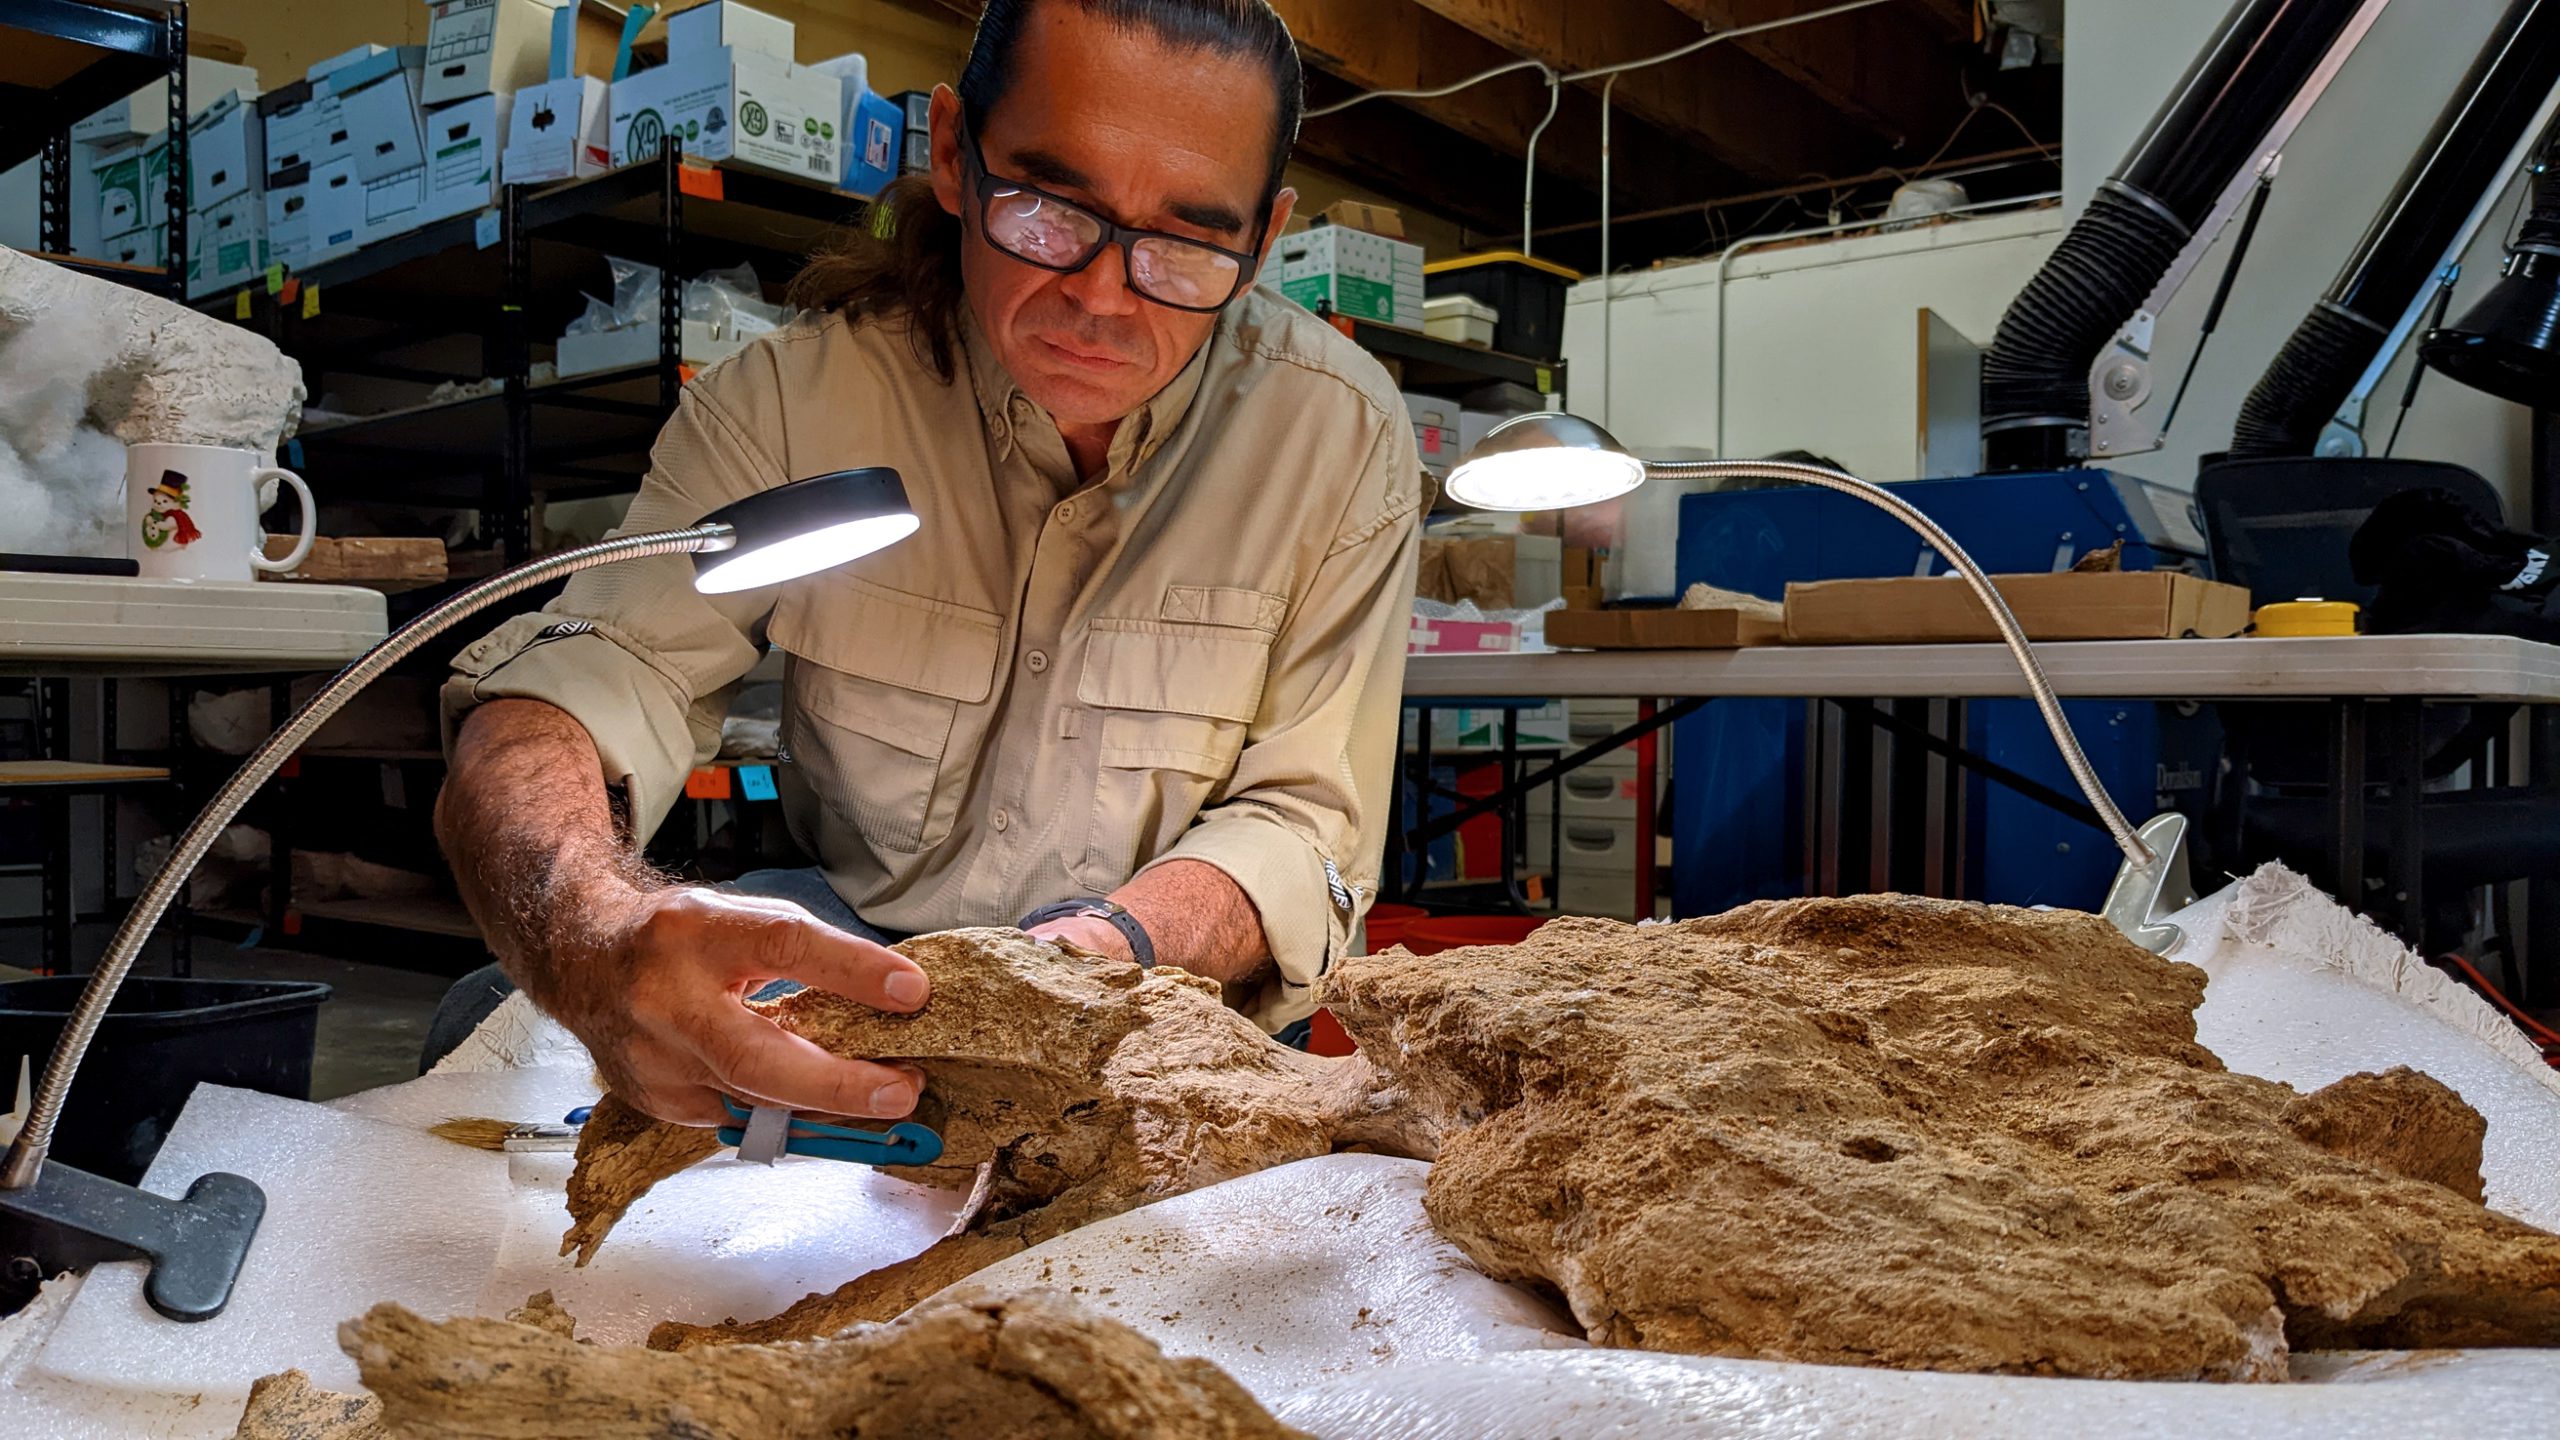 An archeologist examines a collection of fossils.